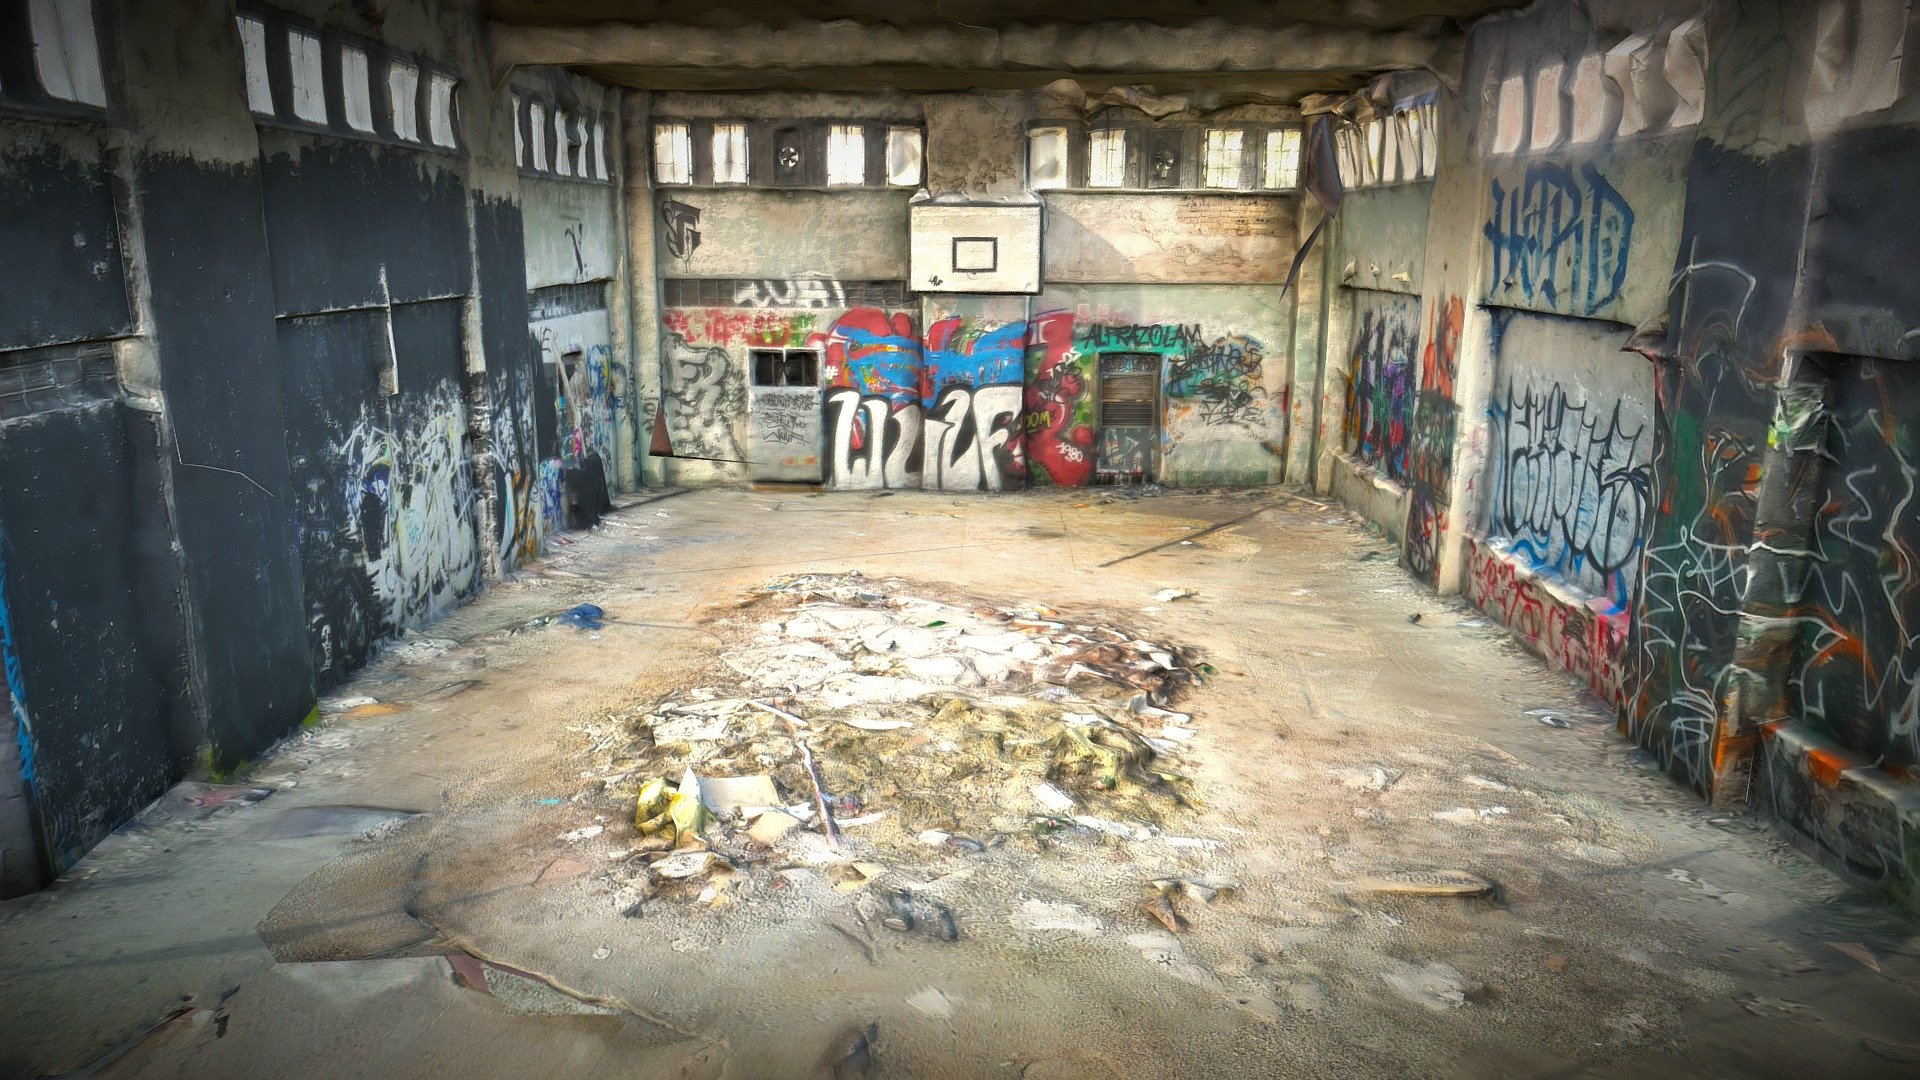 Found this basketball room in an abandonned airport in Berlin.
Low poly gameready asset made from scan. Two materials to fit two sets of 4k textures 3d model